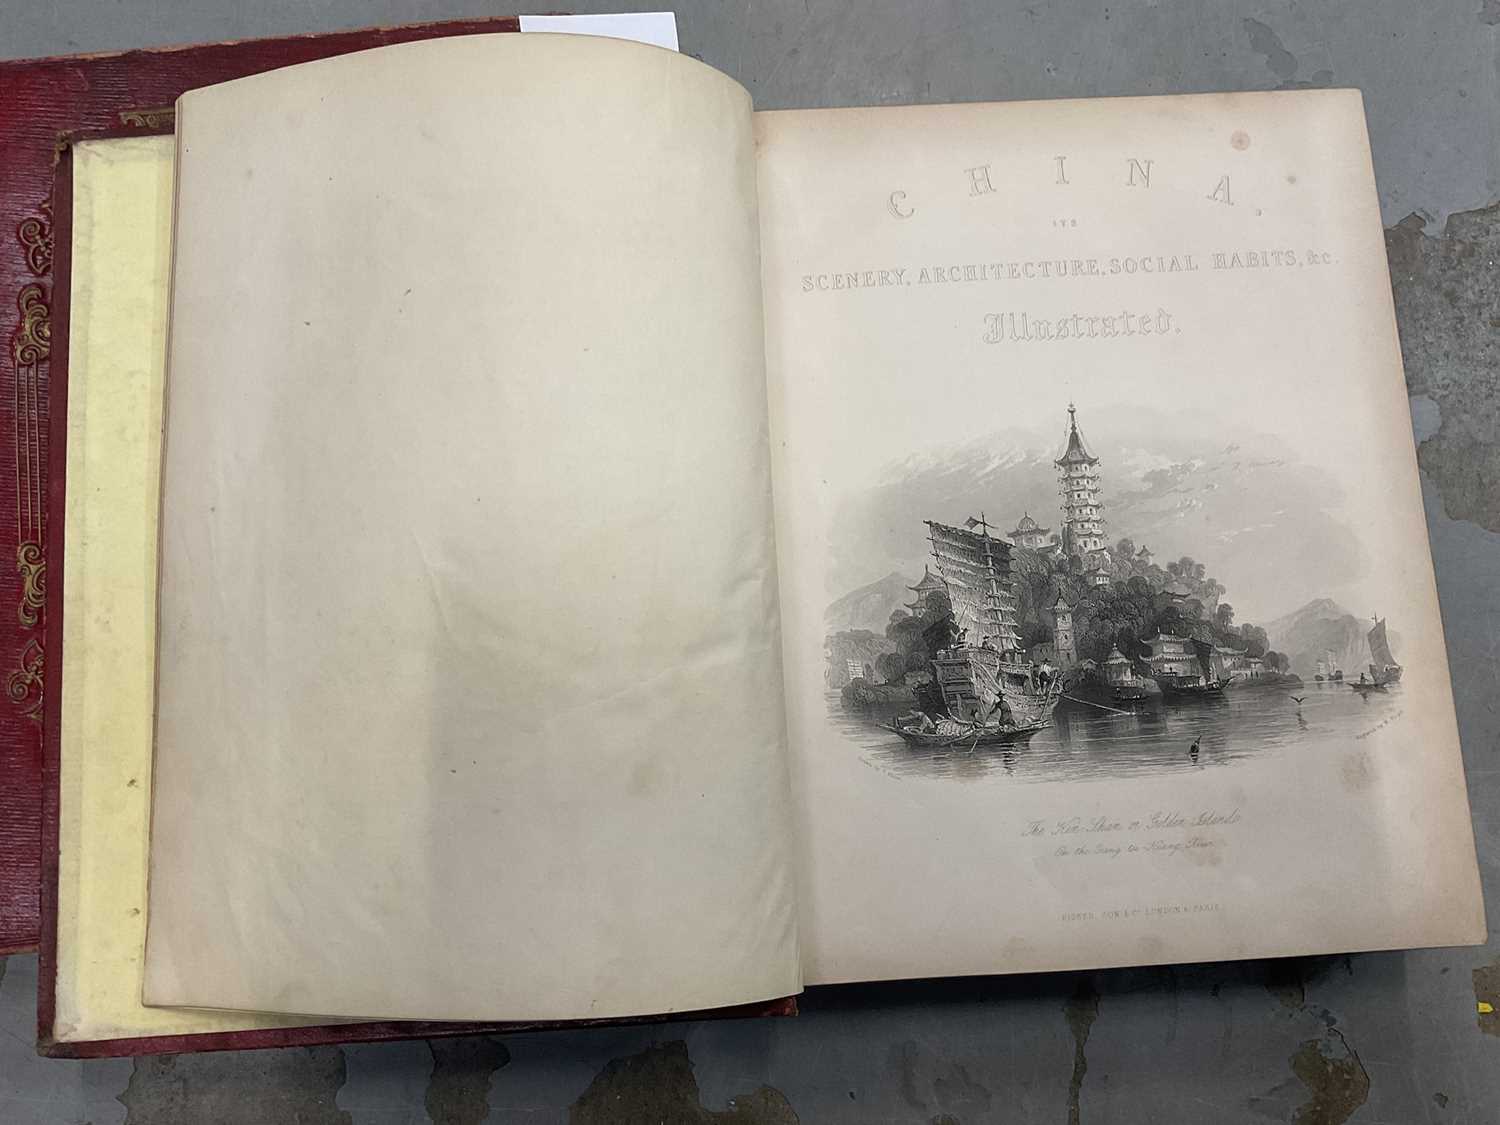 China Illustrated, drawn from the sketches by Thomas Allom, 2 vols., published by Fisher, Son & Co. - Image 2 of 5